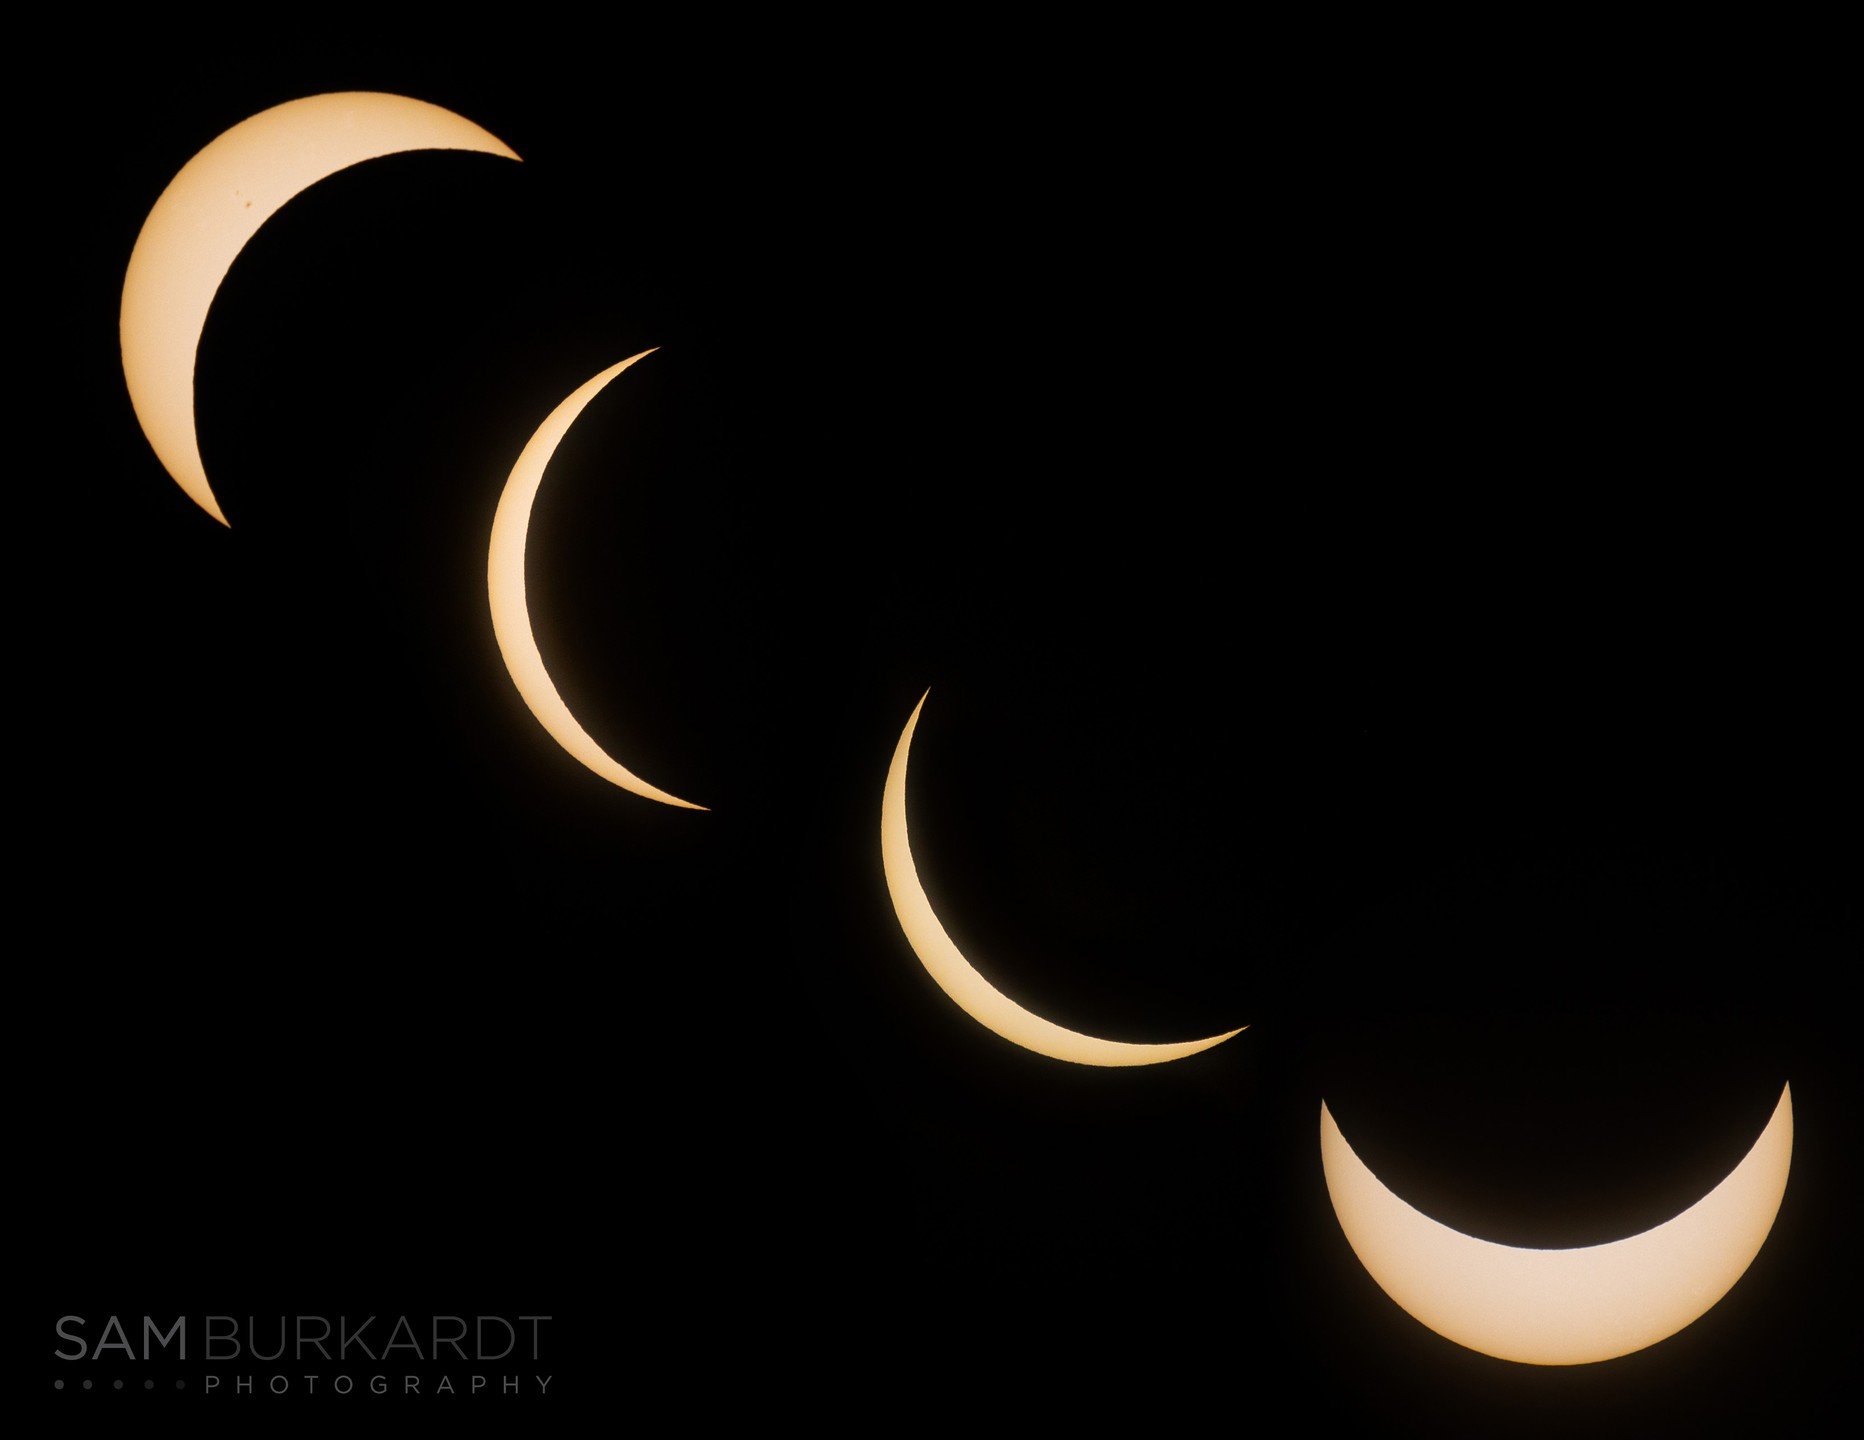 92% Eclipse in CT! Fun to photograph 🌘